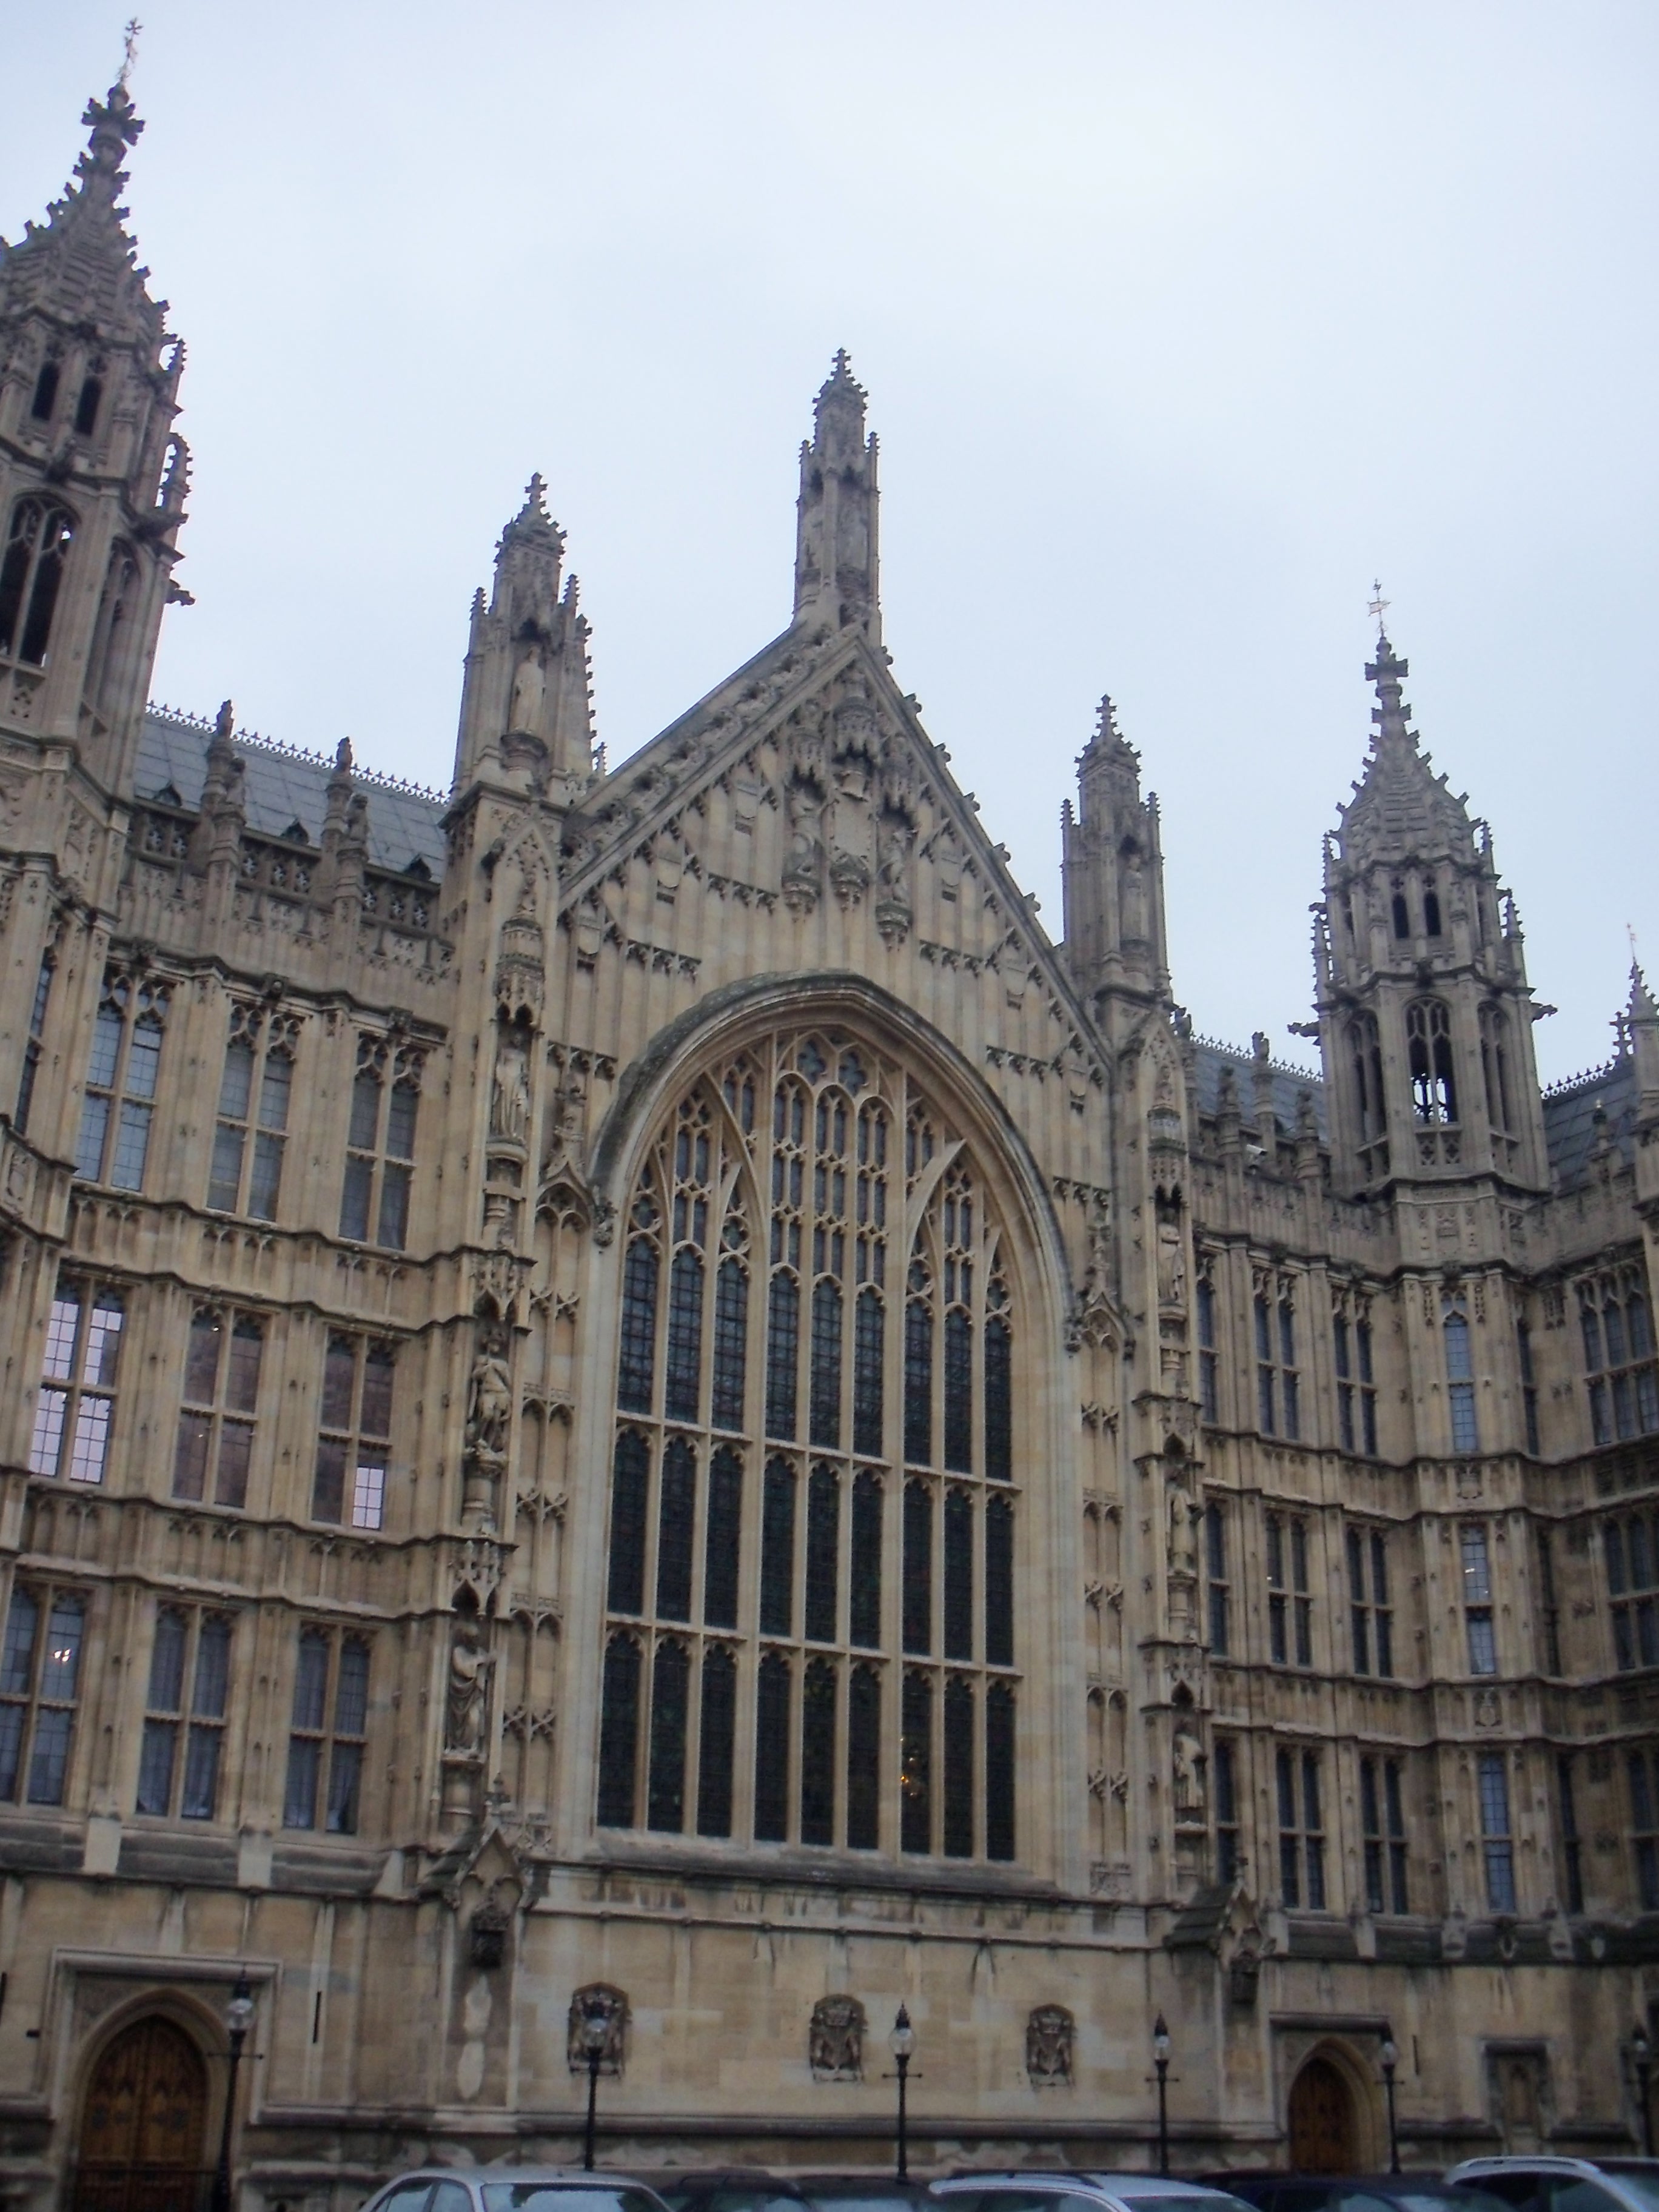 Palace of westminster.JPG